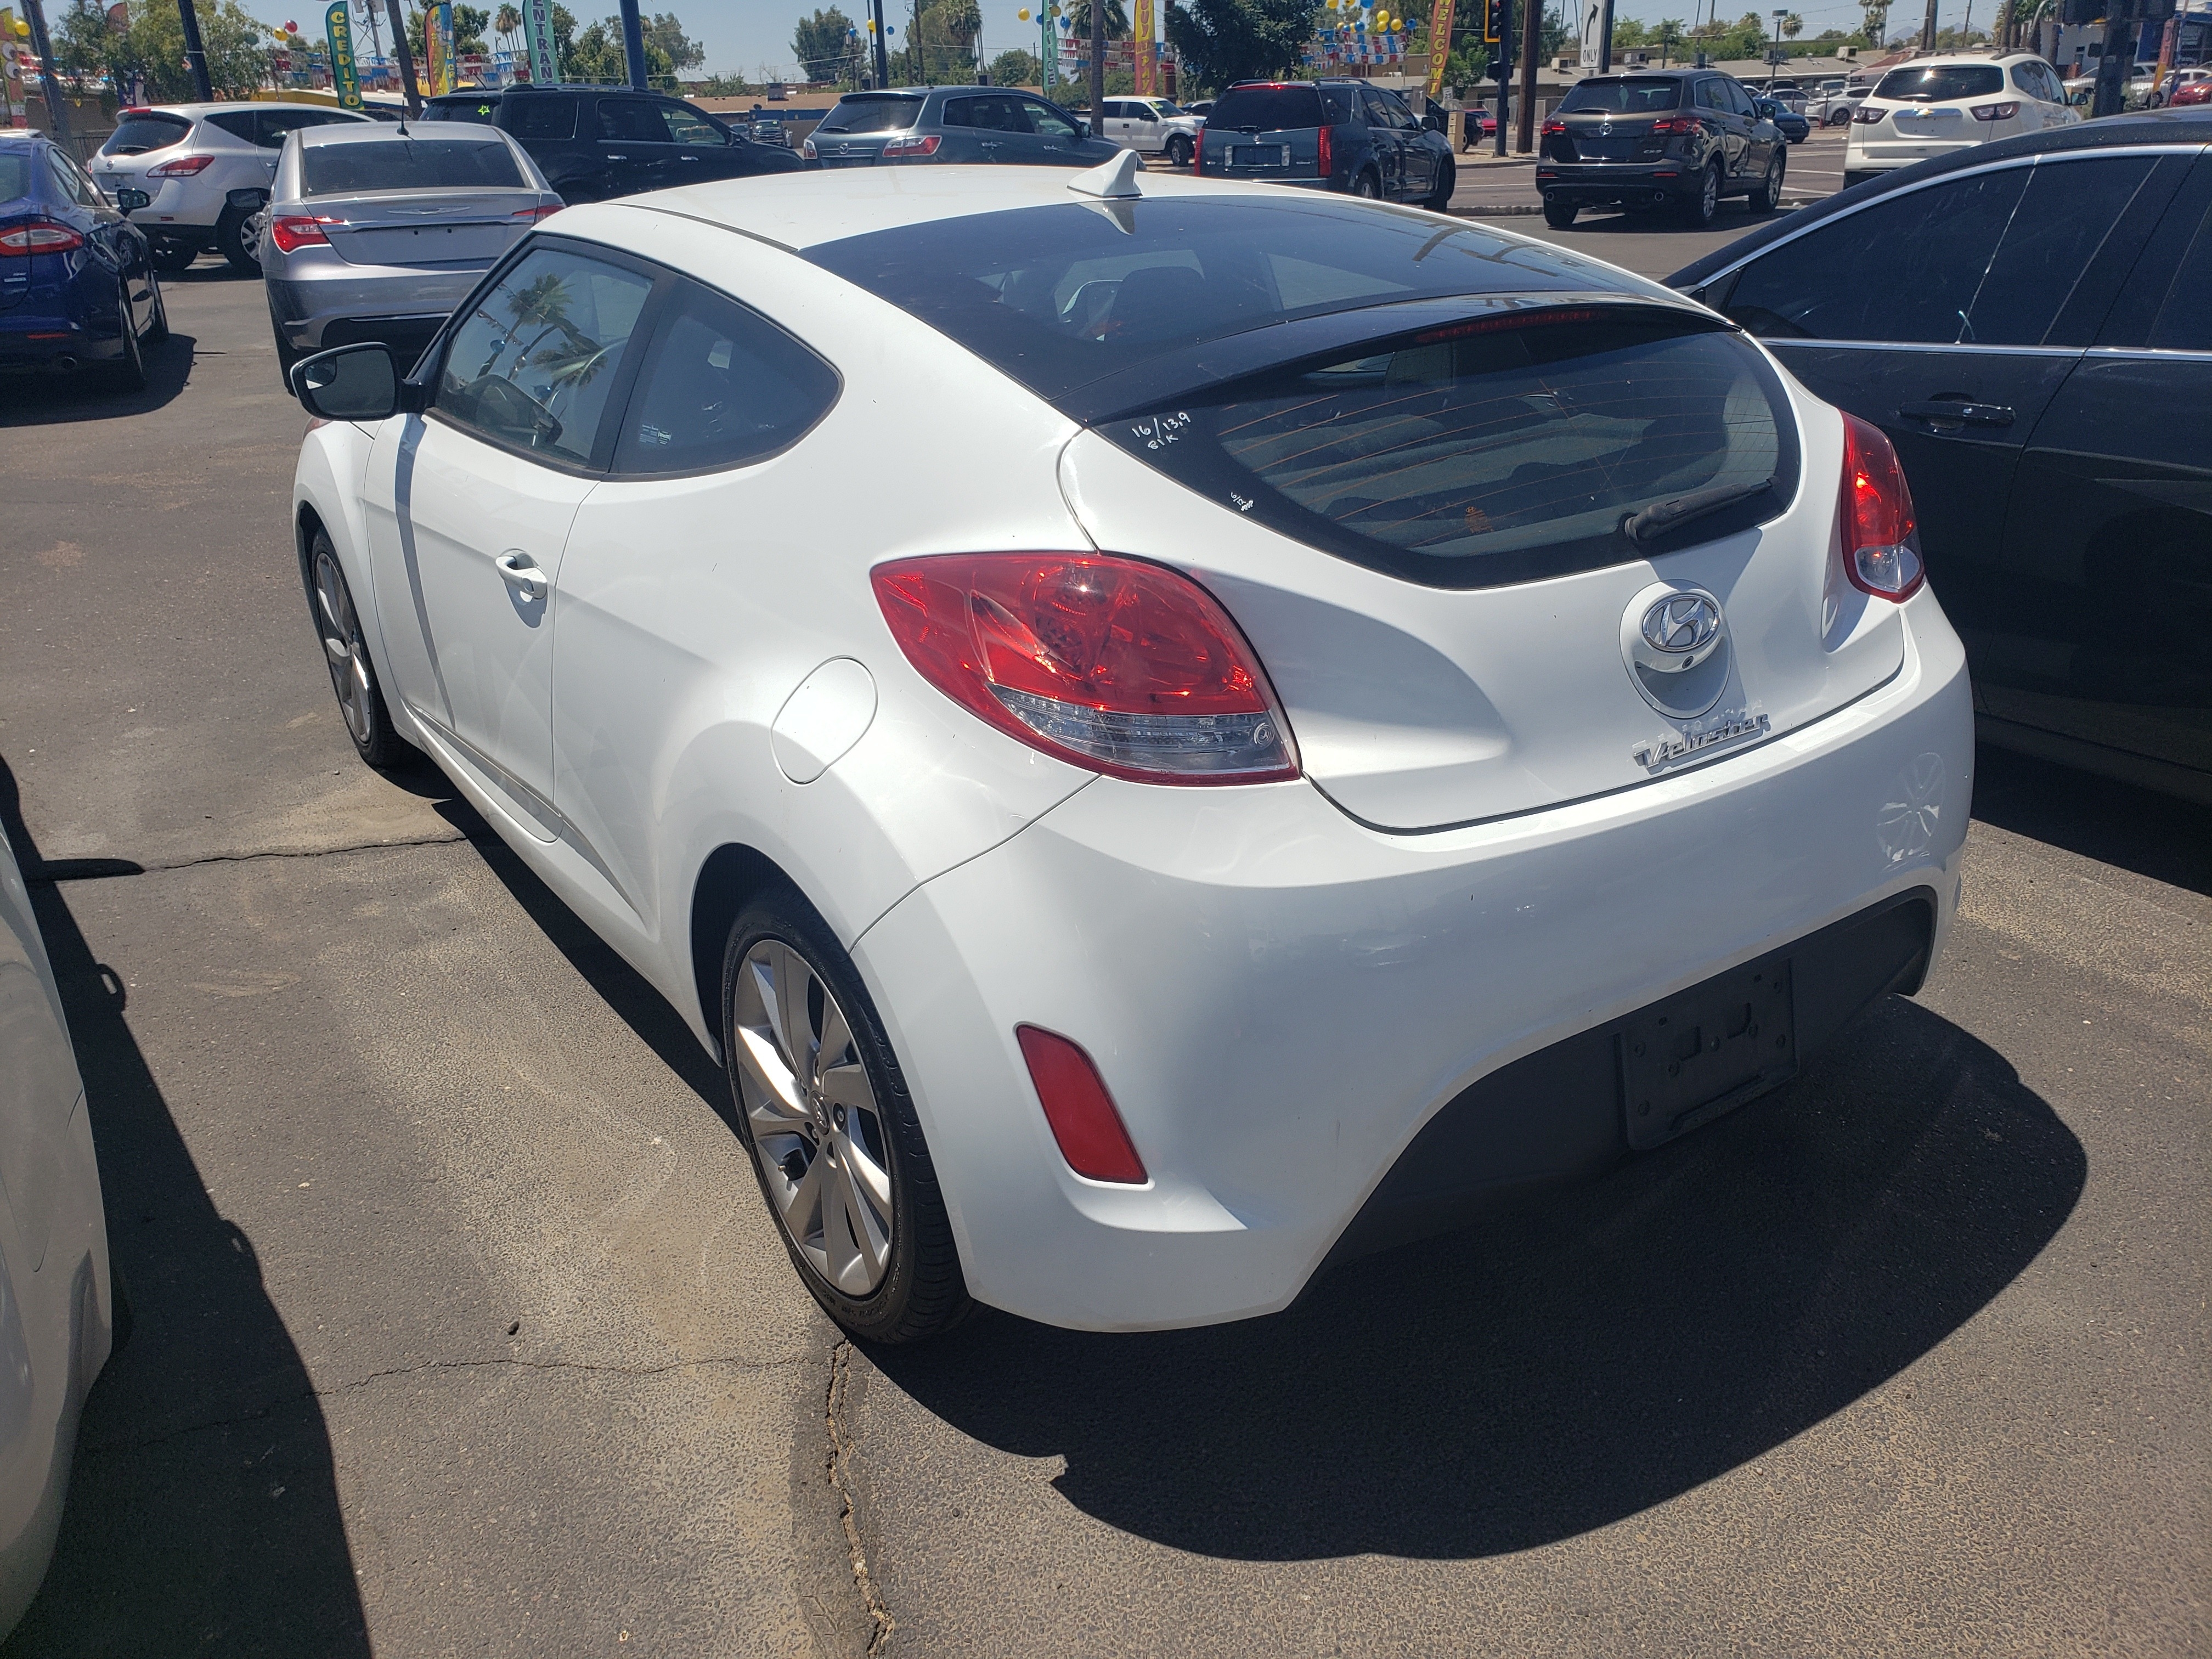 PreOwned 2016 Hyundai VELOSTER 3 DOOR COUPE 3dr Car in